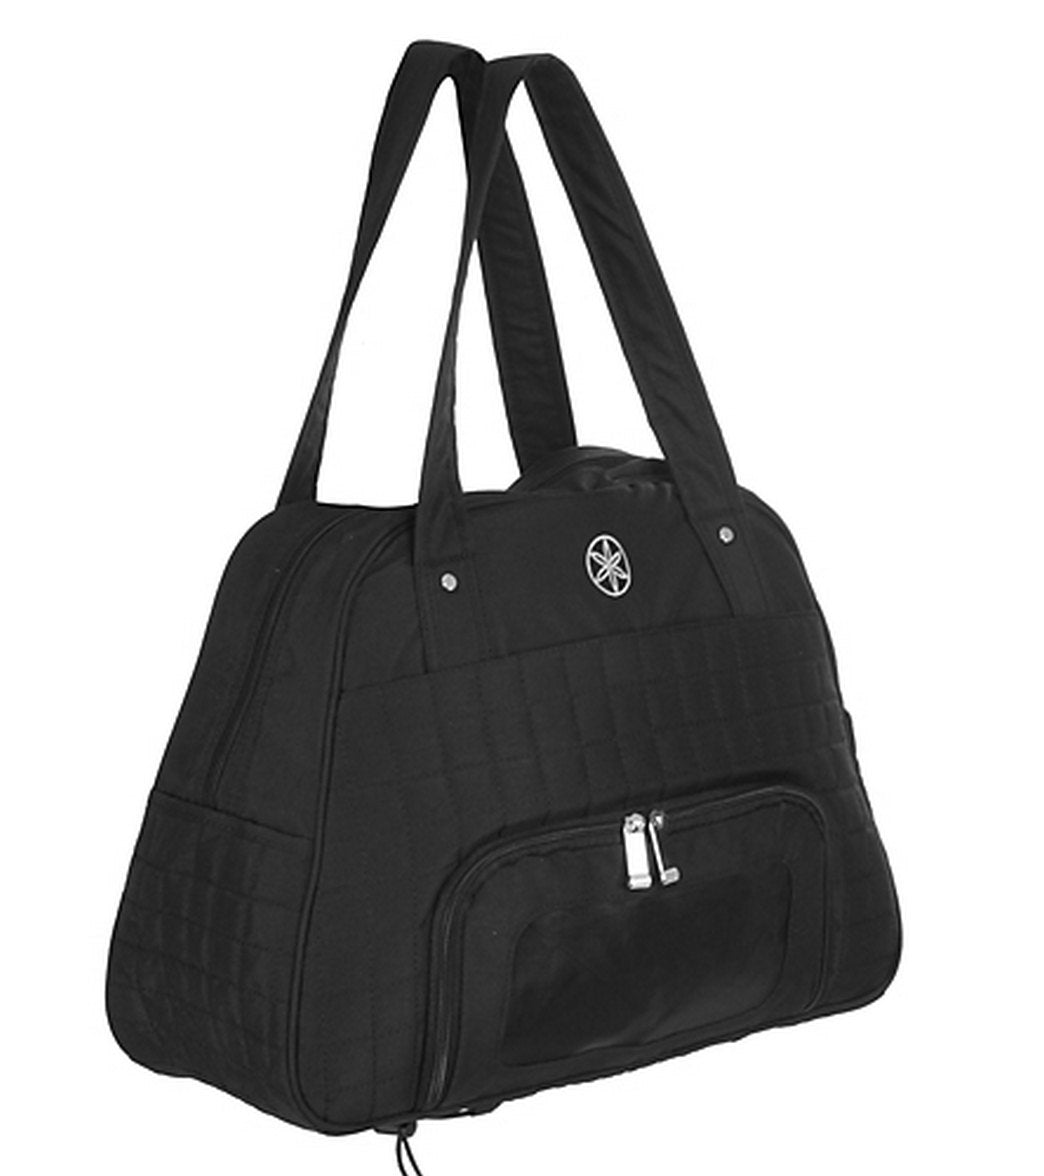 Gaiam Everything Fits Gym Bag at